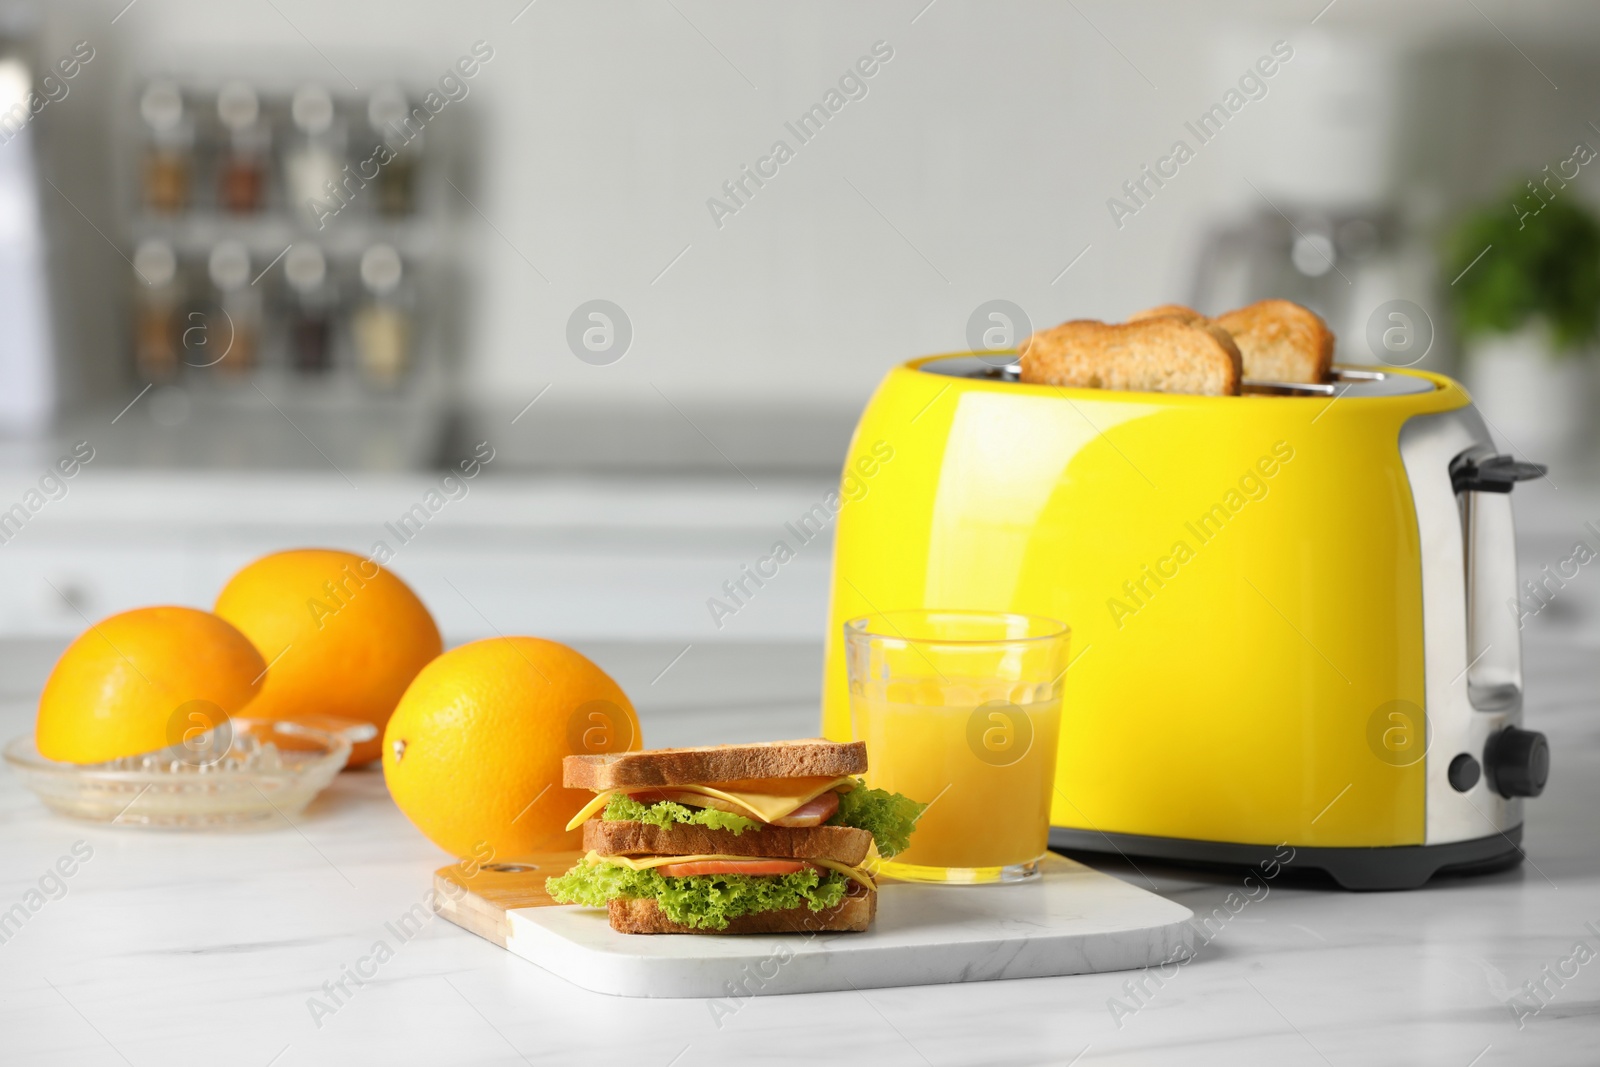 Photo of Yellow toaster with roasted bread slices, sandwich, oranges and juice on white marble table